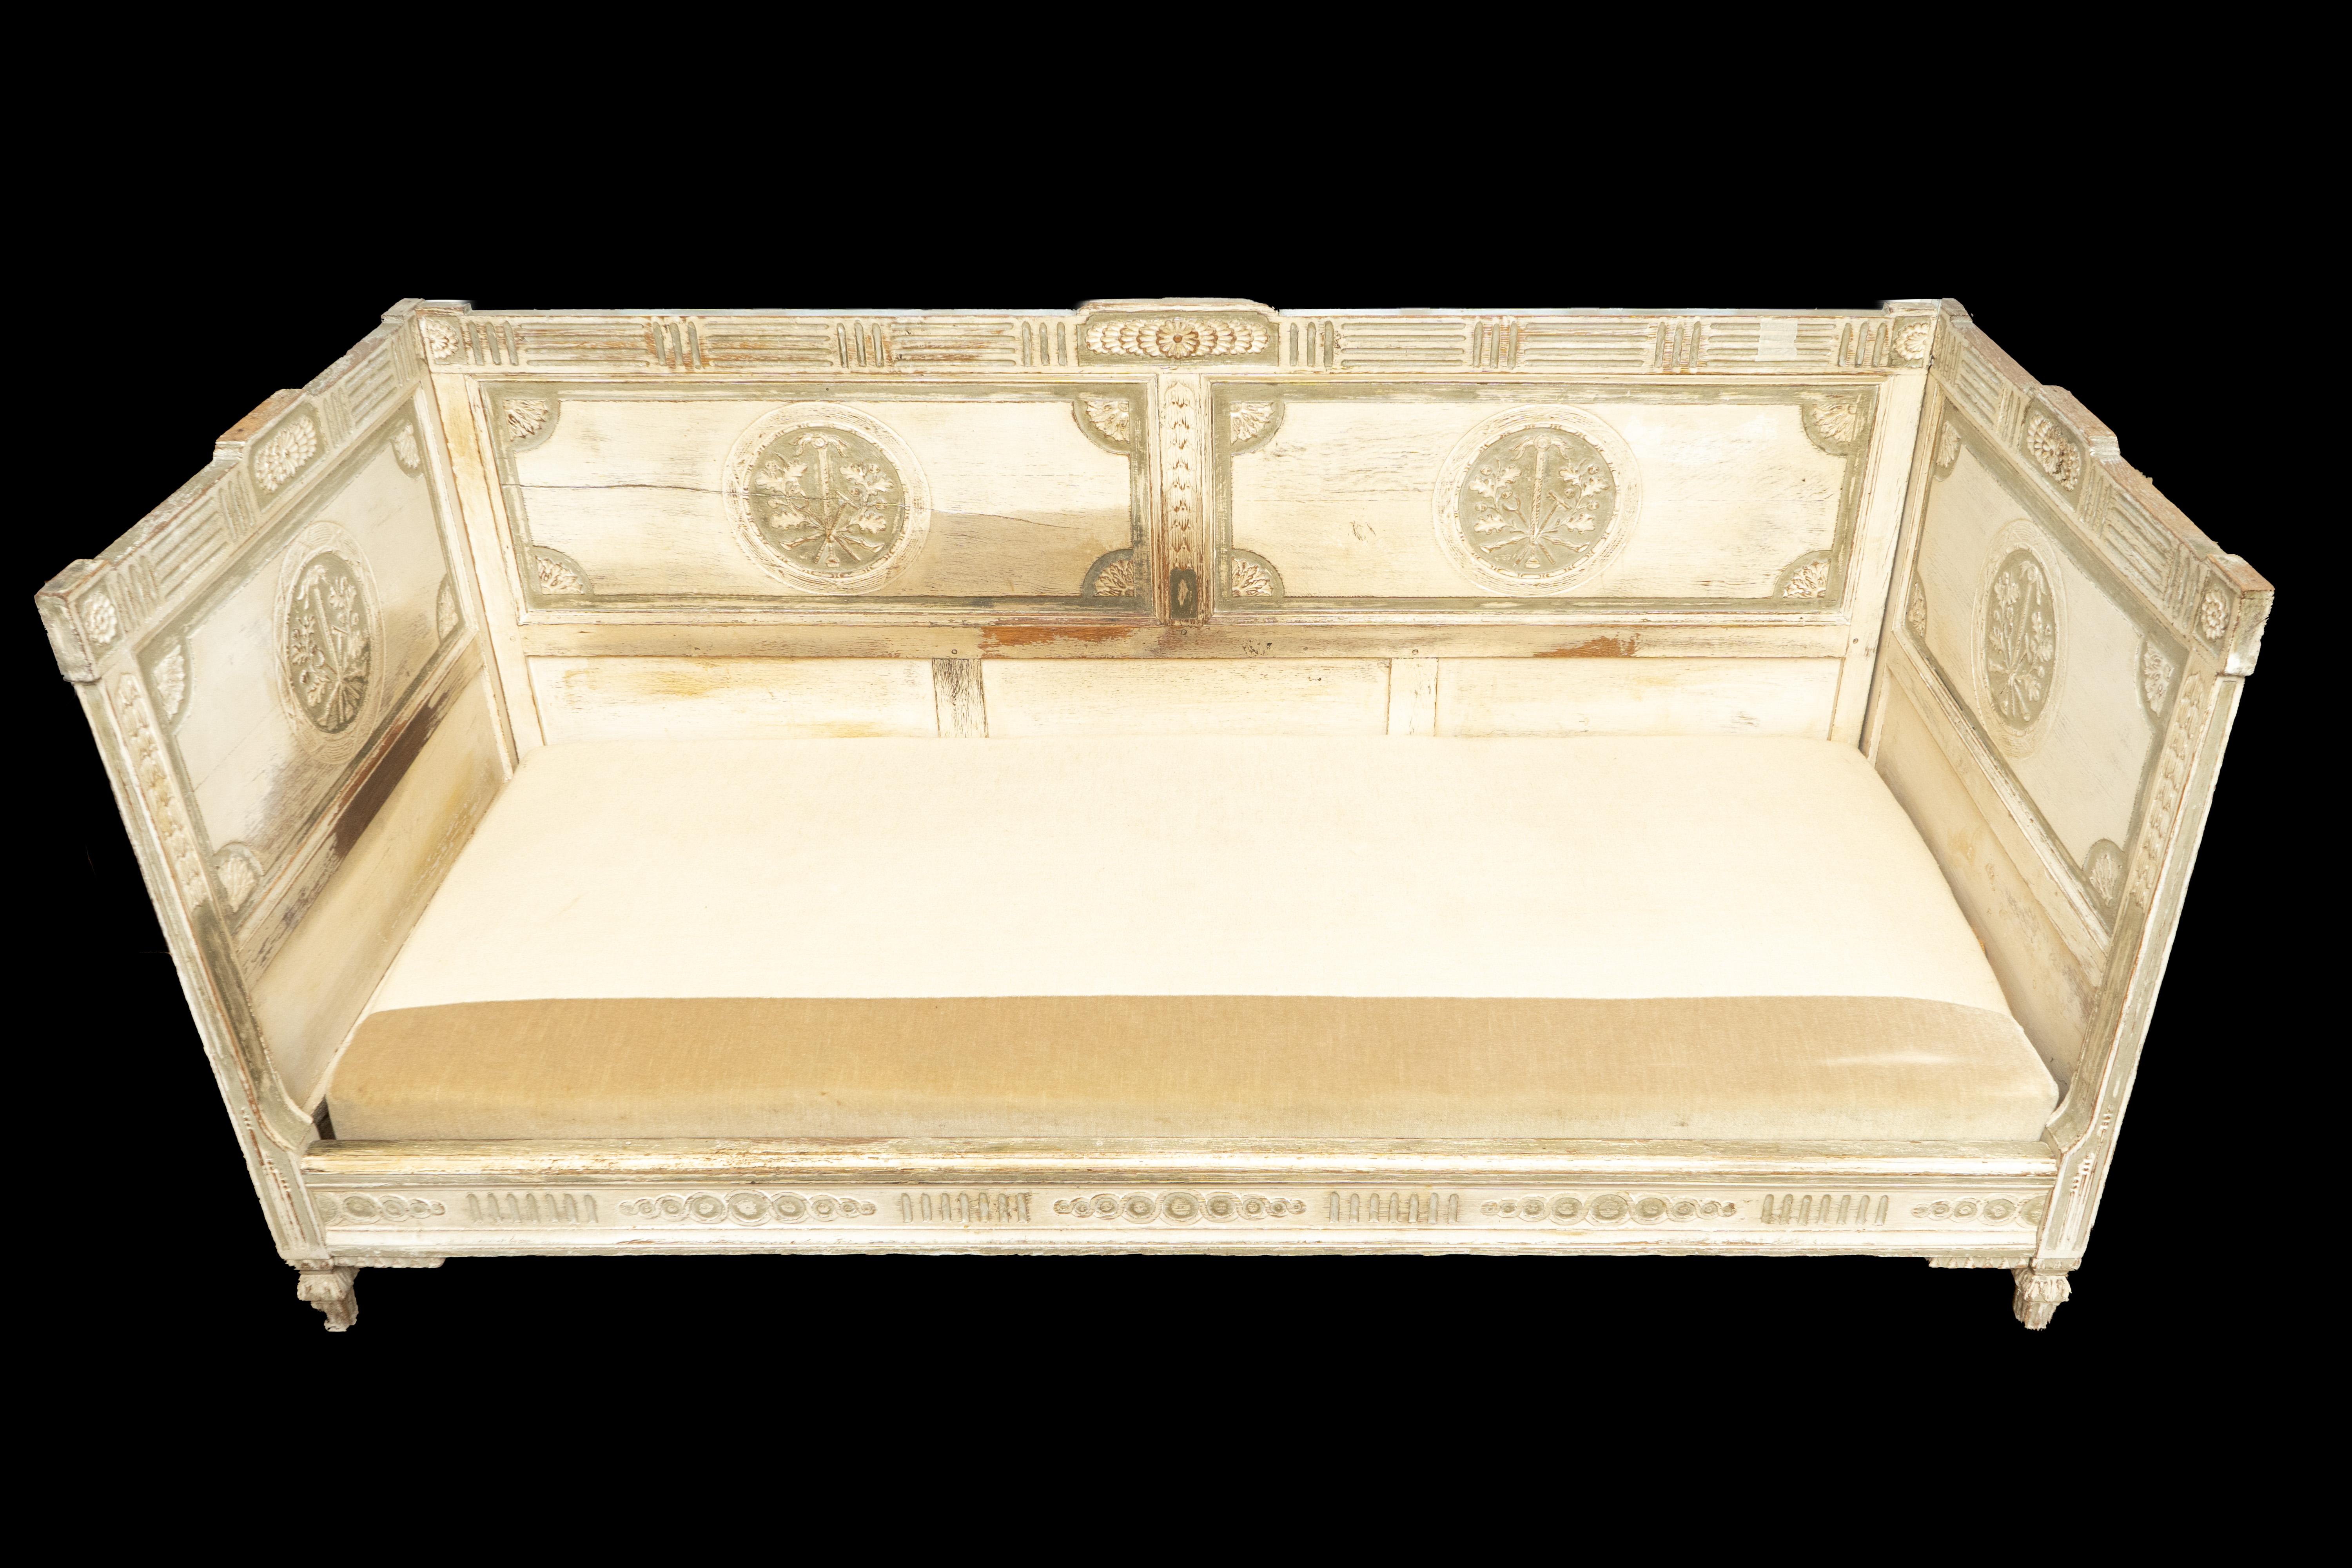 19th Century Gustavian Daybed:

Gustavian daybed is a type of seating furniture that was popular in Sweden during the late 18th and early 19th centuries. It is characterized by its simple yet elegant design, which reflects the Gustavian style that